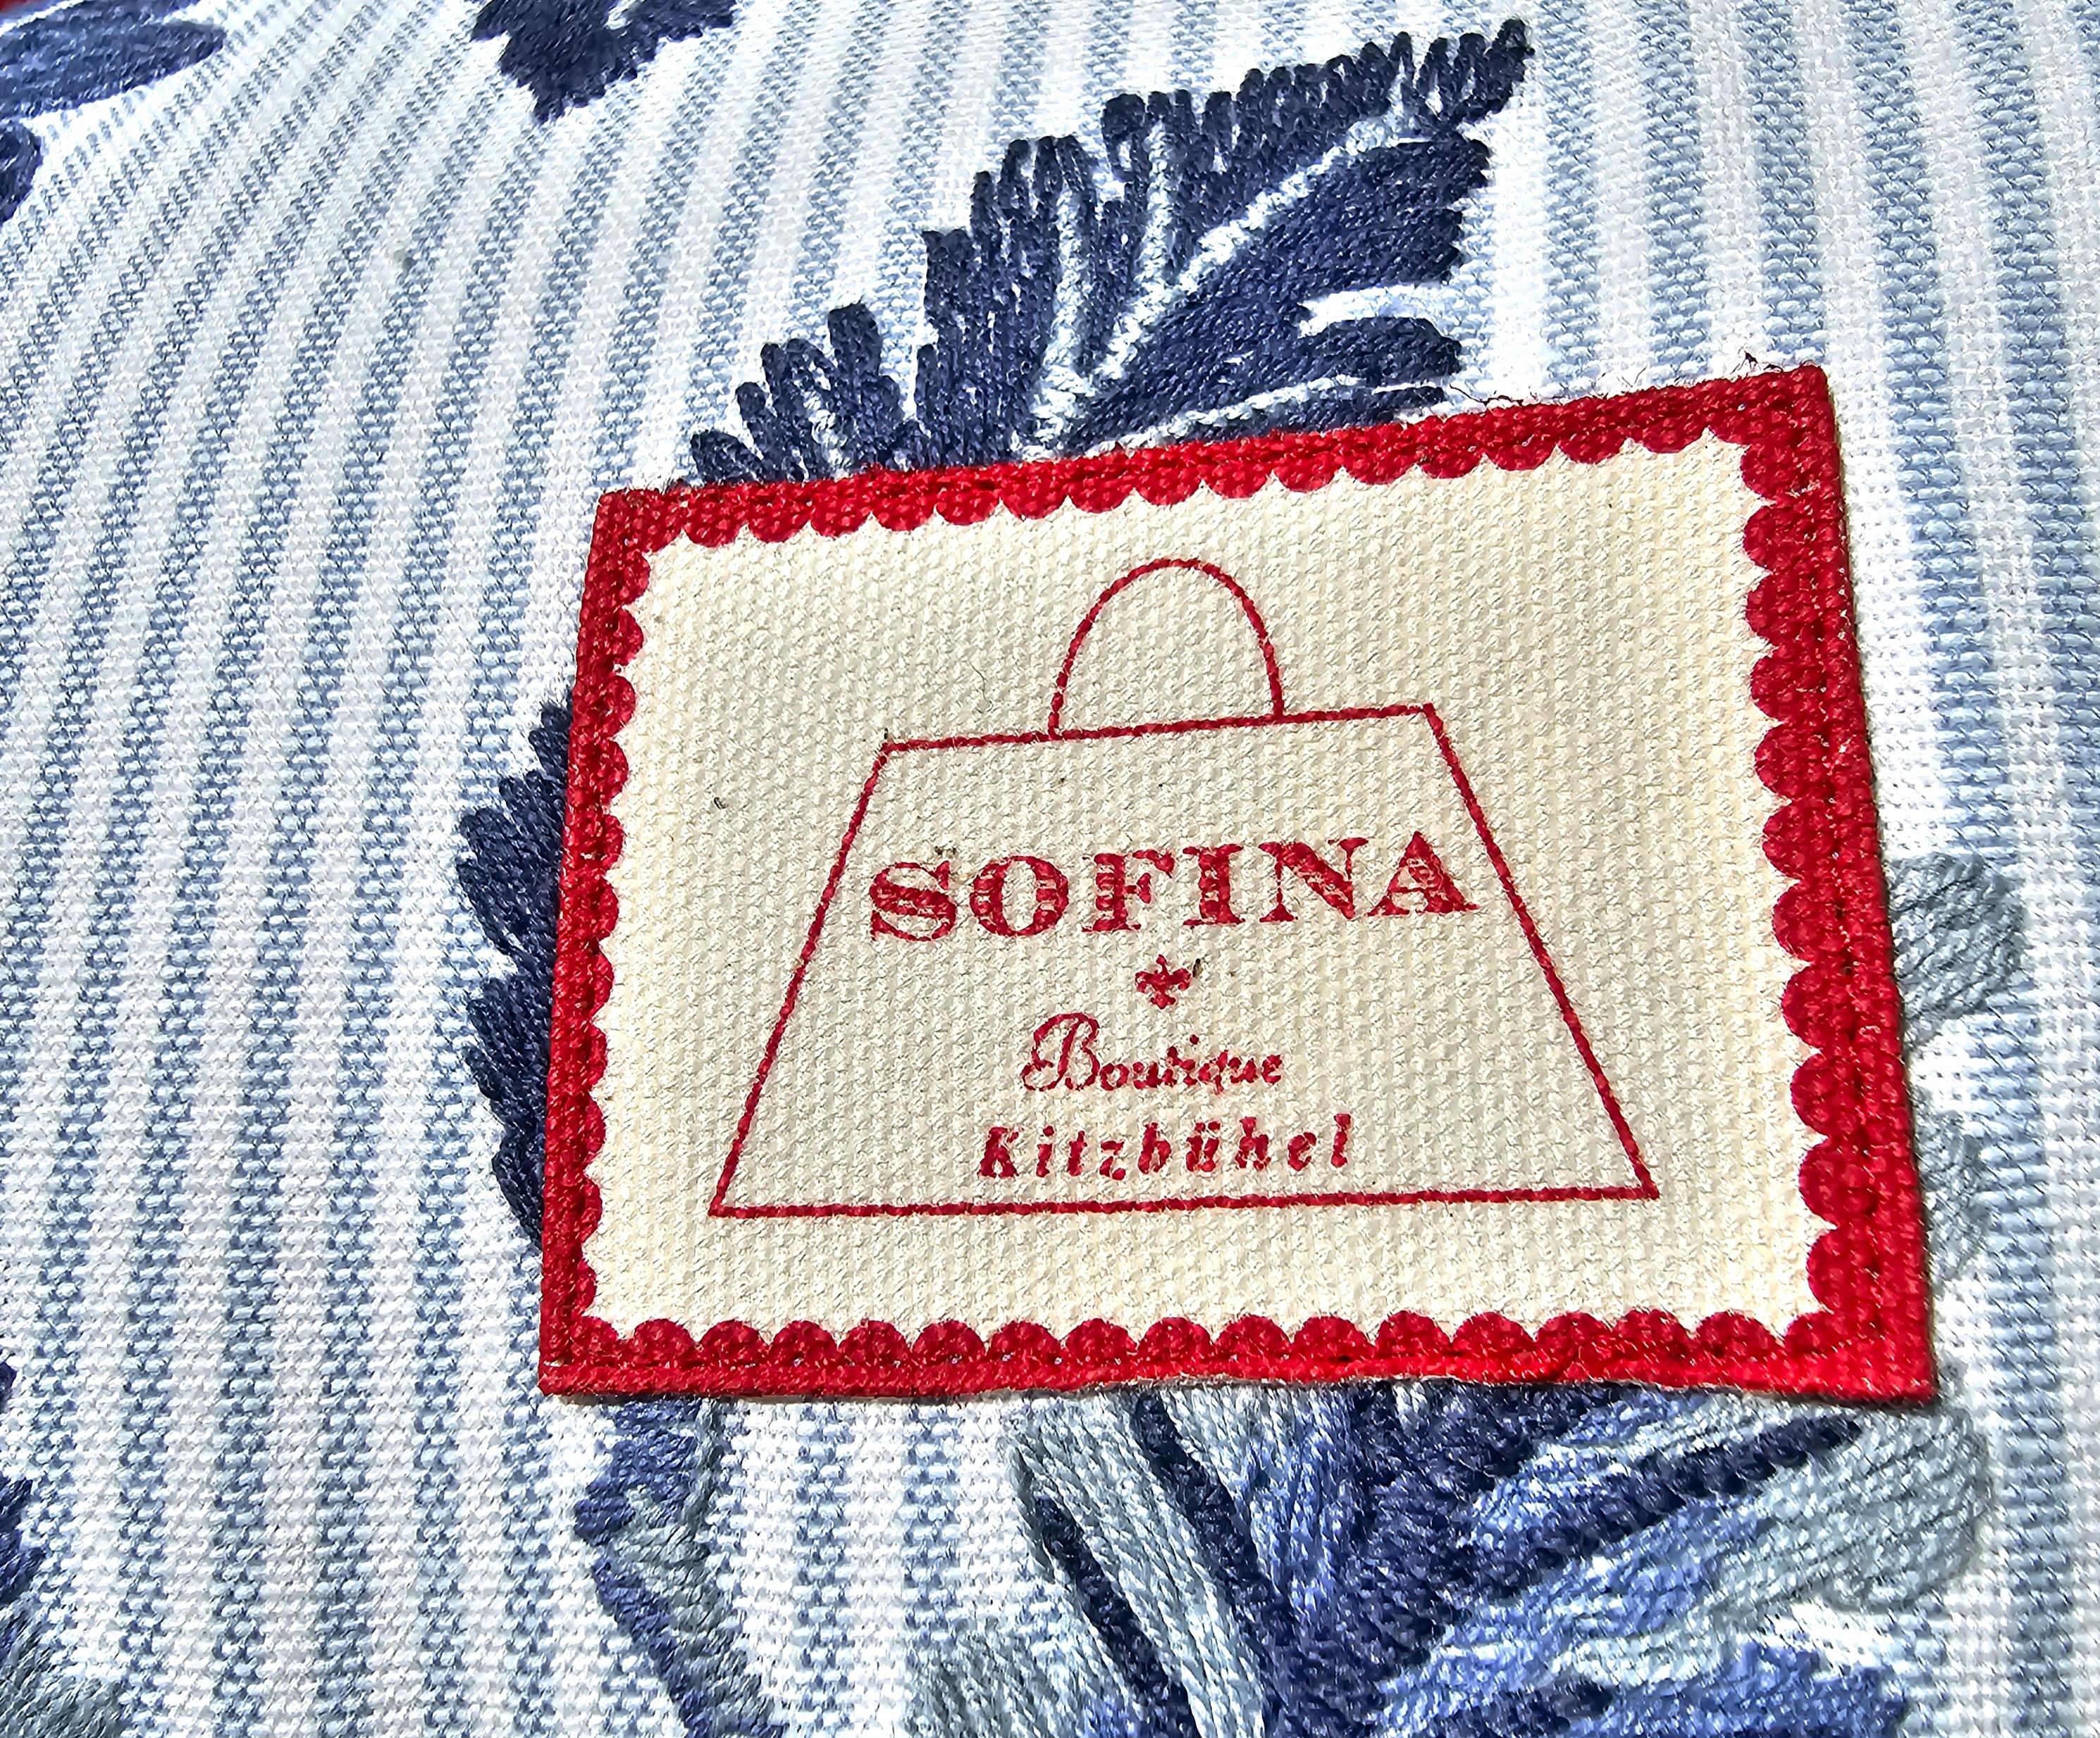 Hand-Crafted Country Style Cushion Cotton Blue Stripes Sofina Boutique Kitzbuehel For Sale